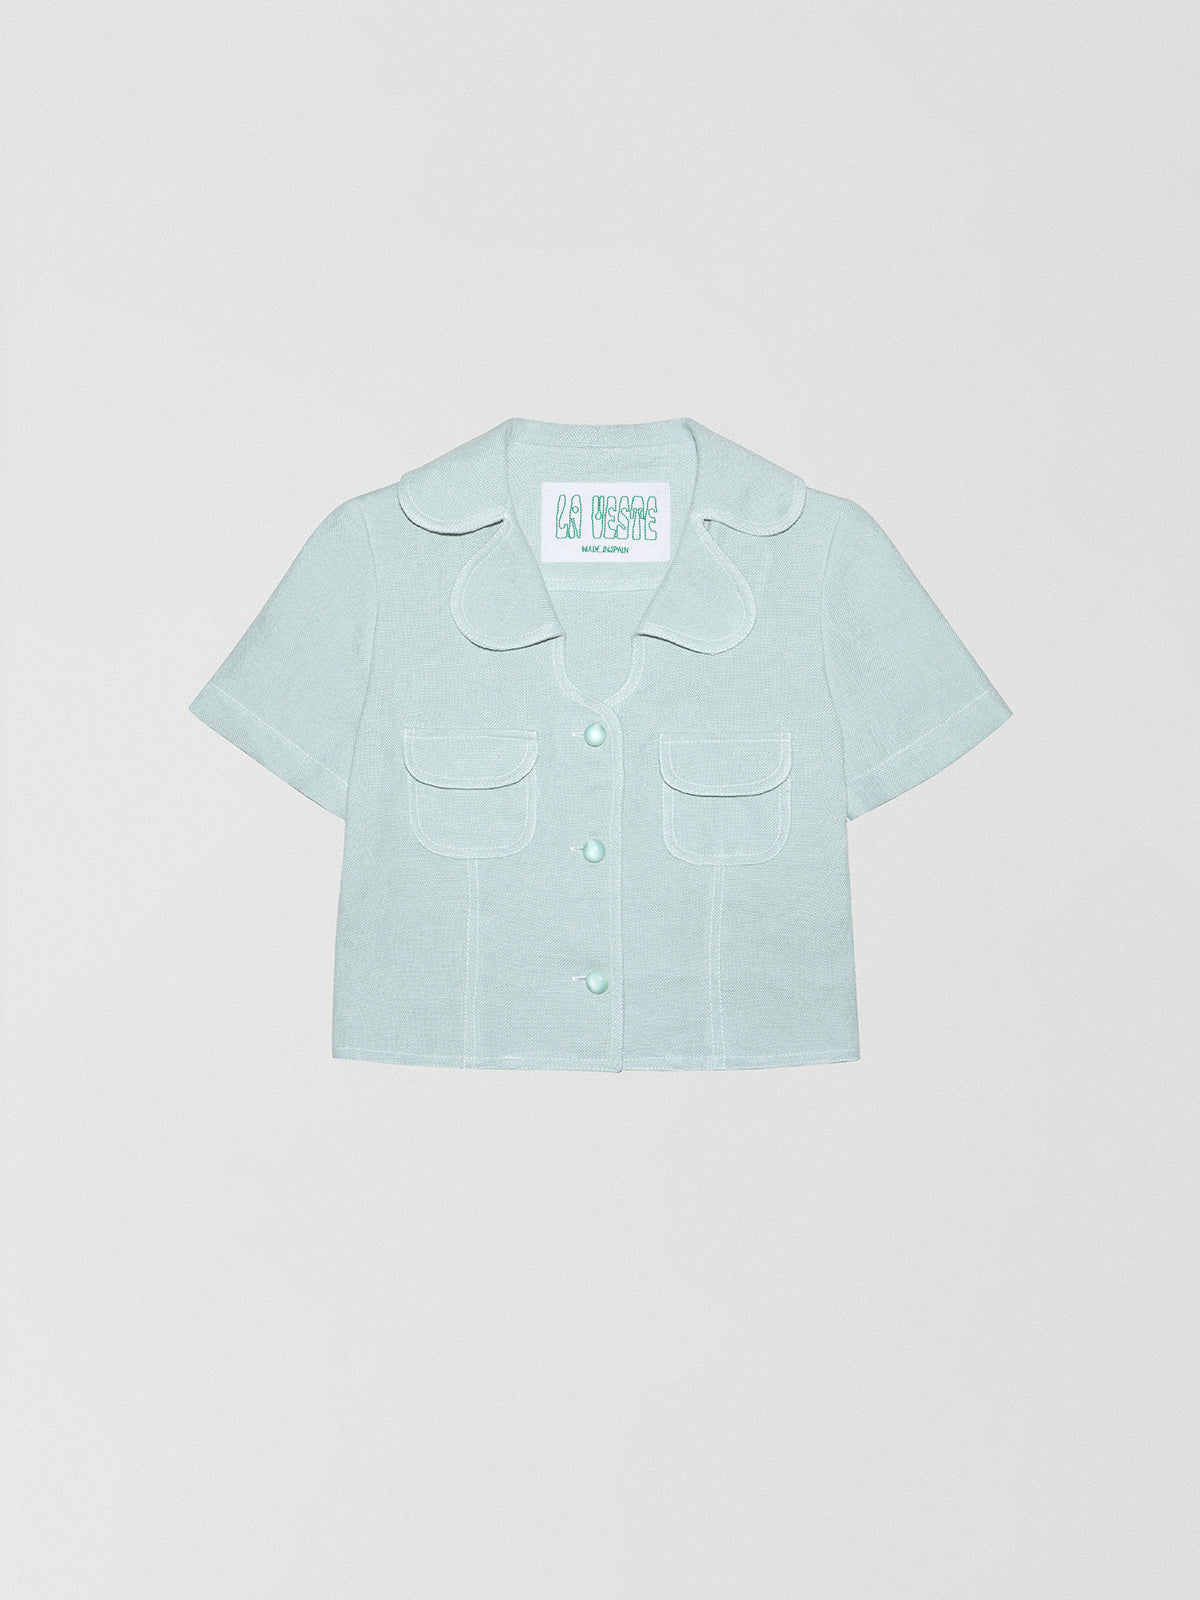 Loto Blue Shirt is a shirt made of light blue linen fabric with two pockets in the front.